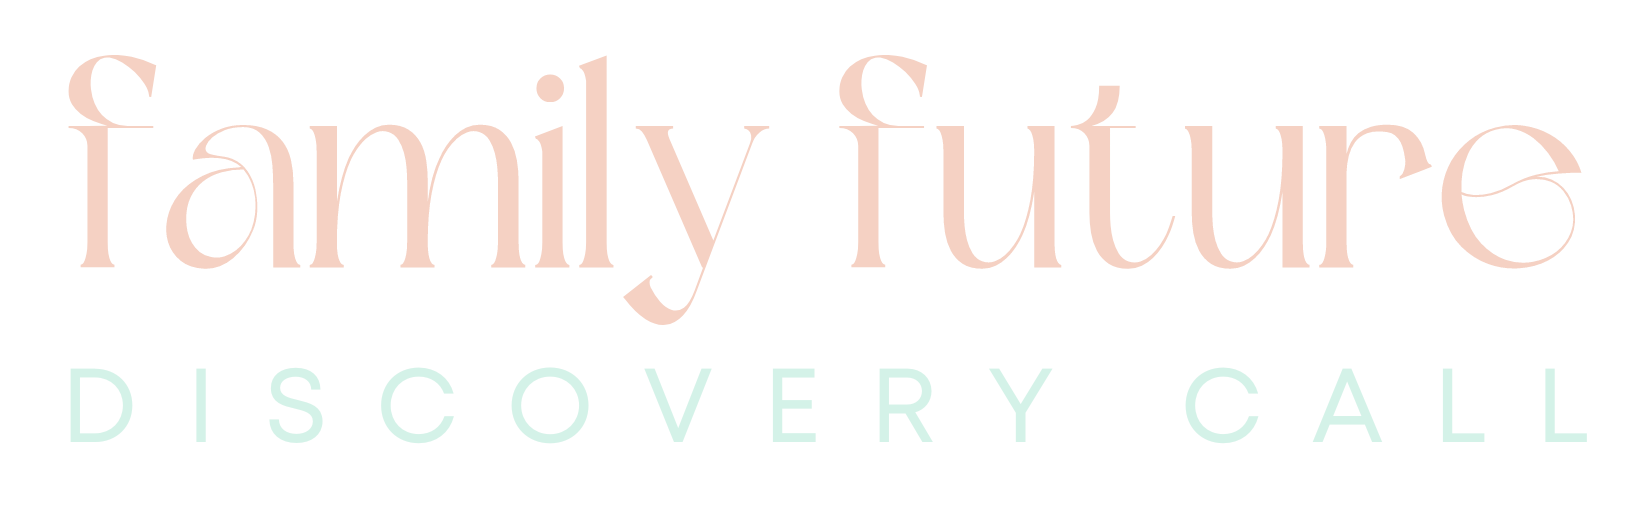 Family Future Discovery Call